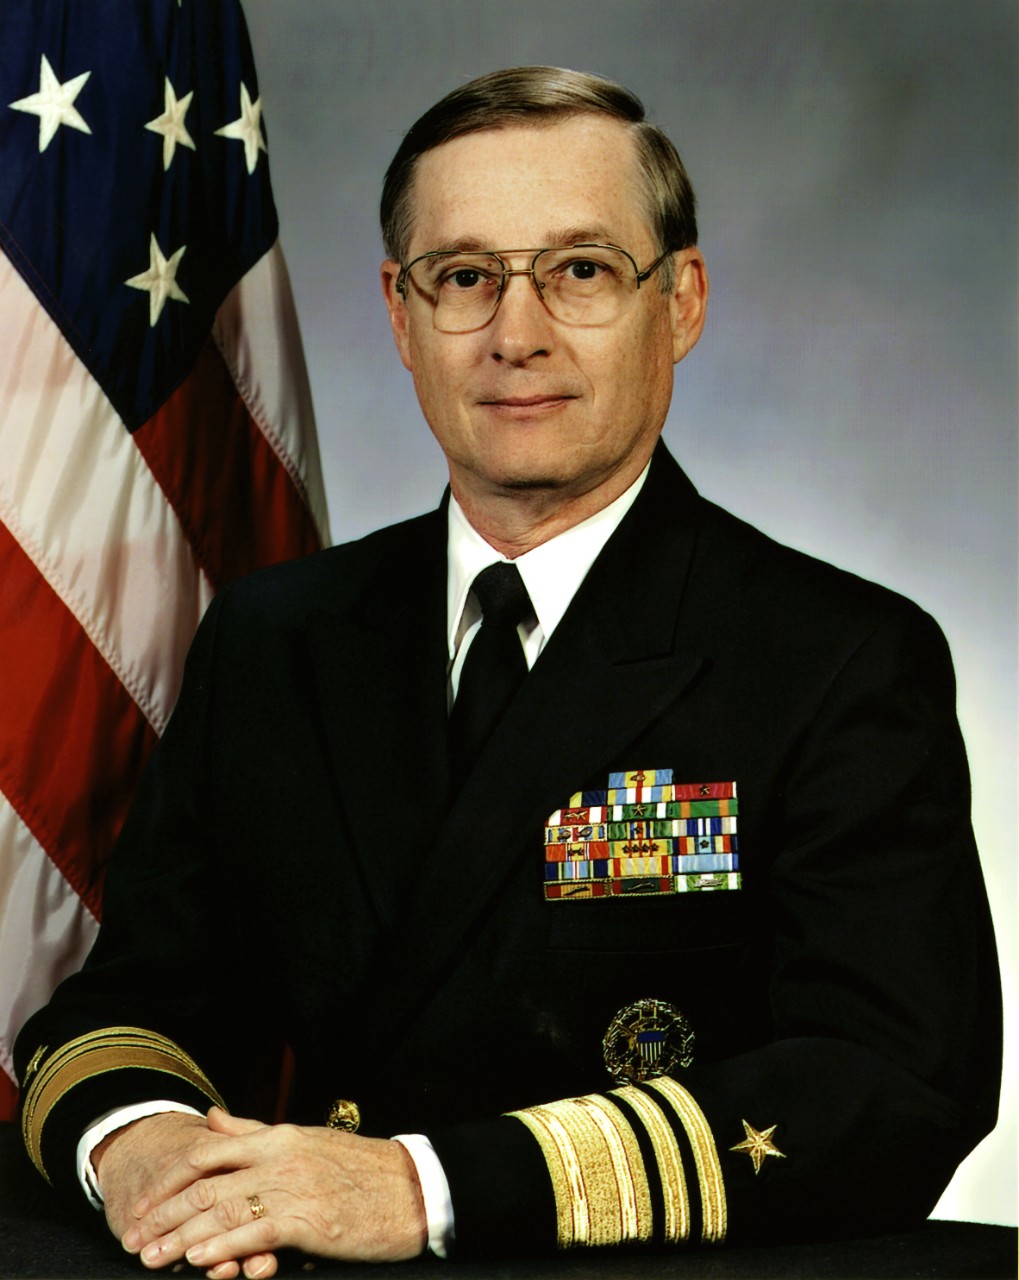 <p>L38-43.04.01 VADM Lowell E. Jacoby</p>
